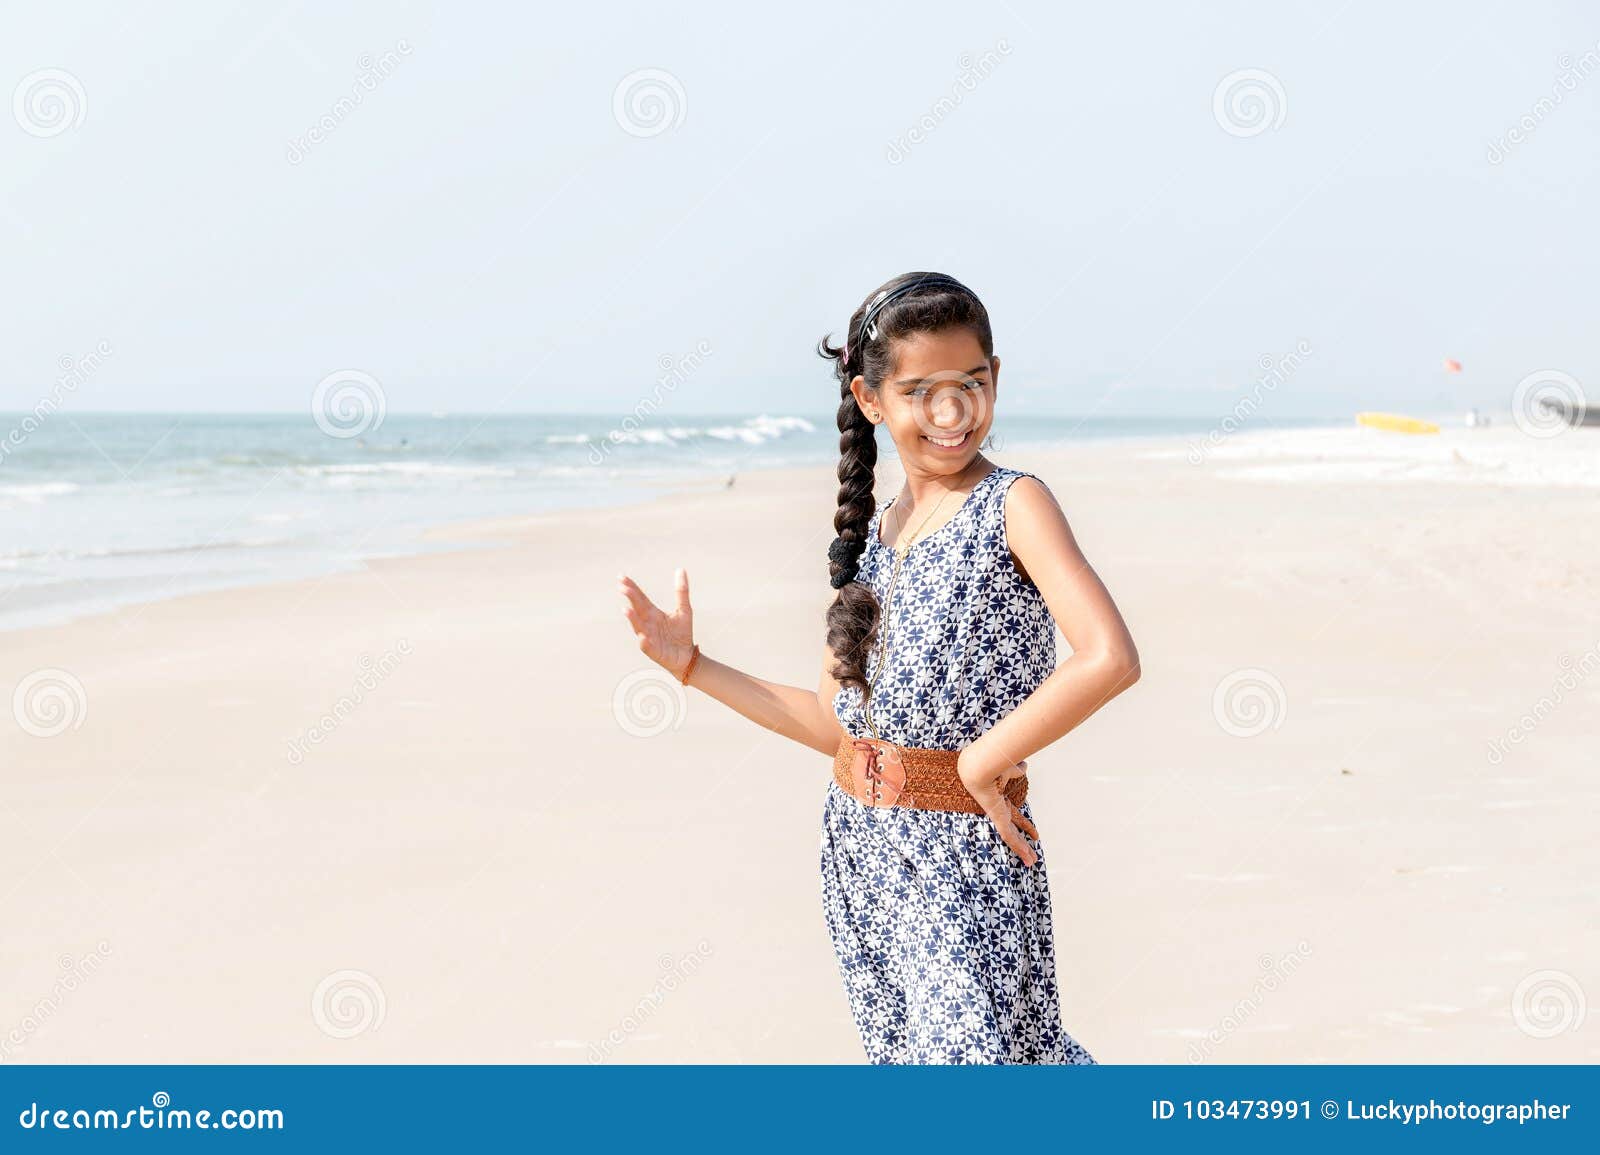 beach dress for indian ladies